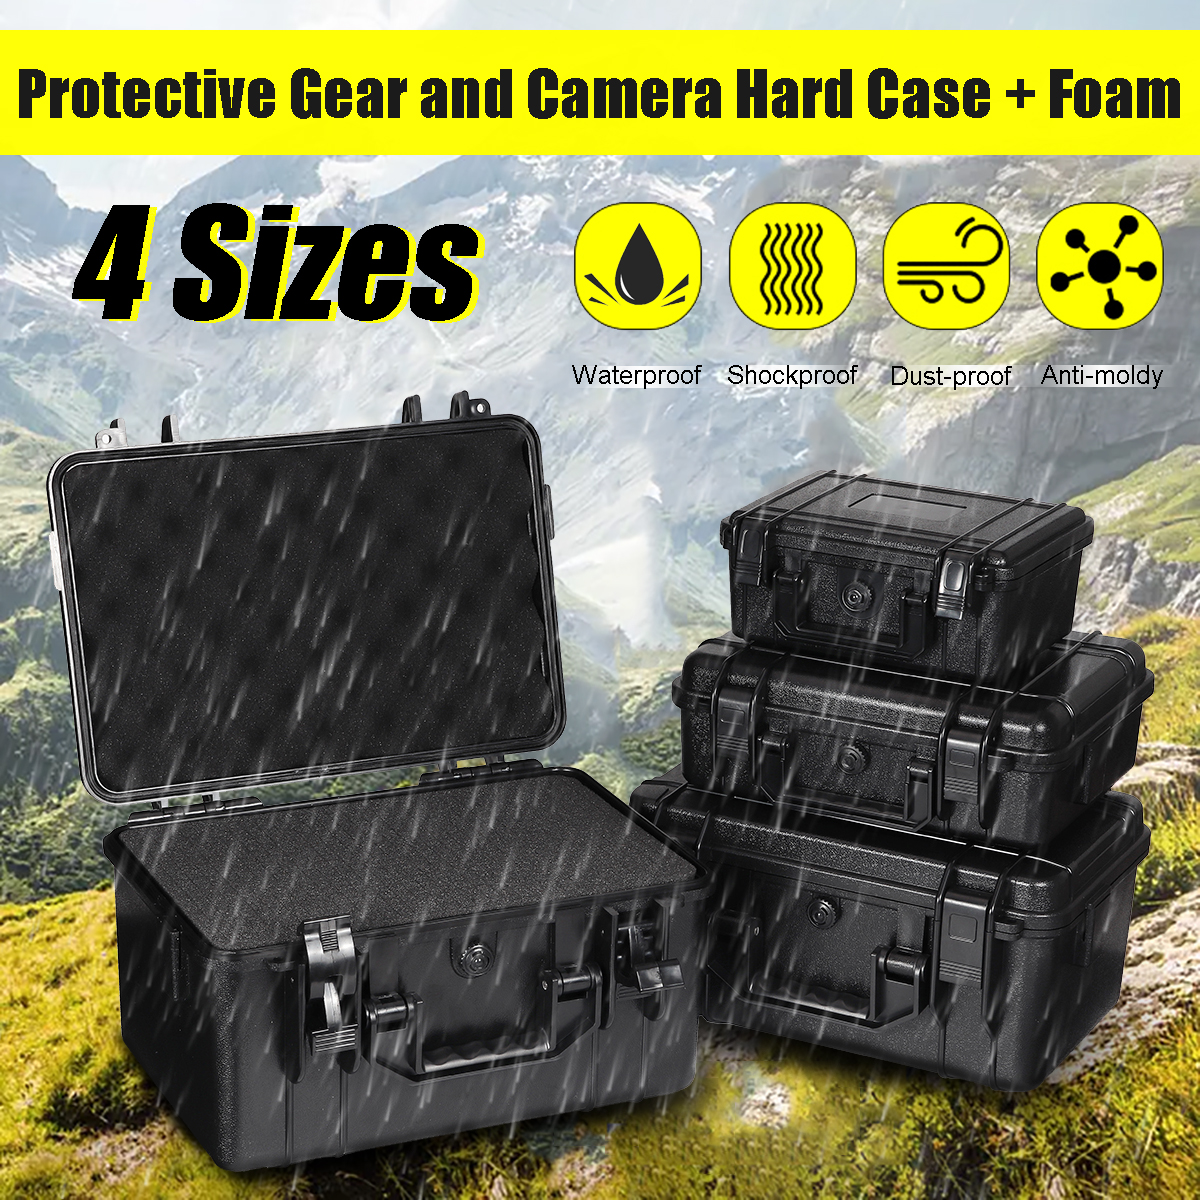 4-Sizes-ABS-Plastic-Sealed-Waterproof-Storage-Case-Foam-Impact--Resistant-Hiking-Portable-Tool-Box-D-1674189-1